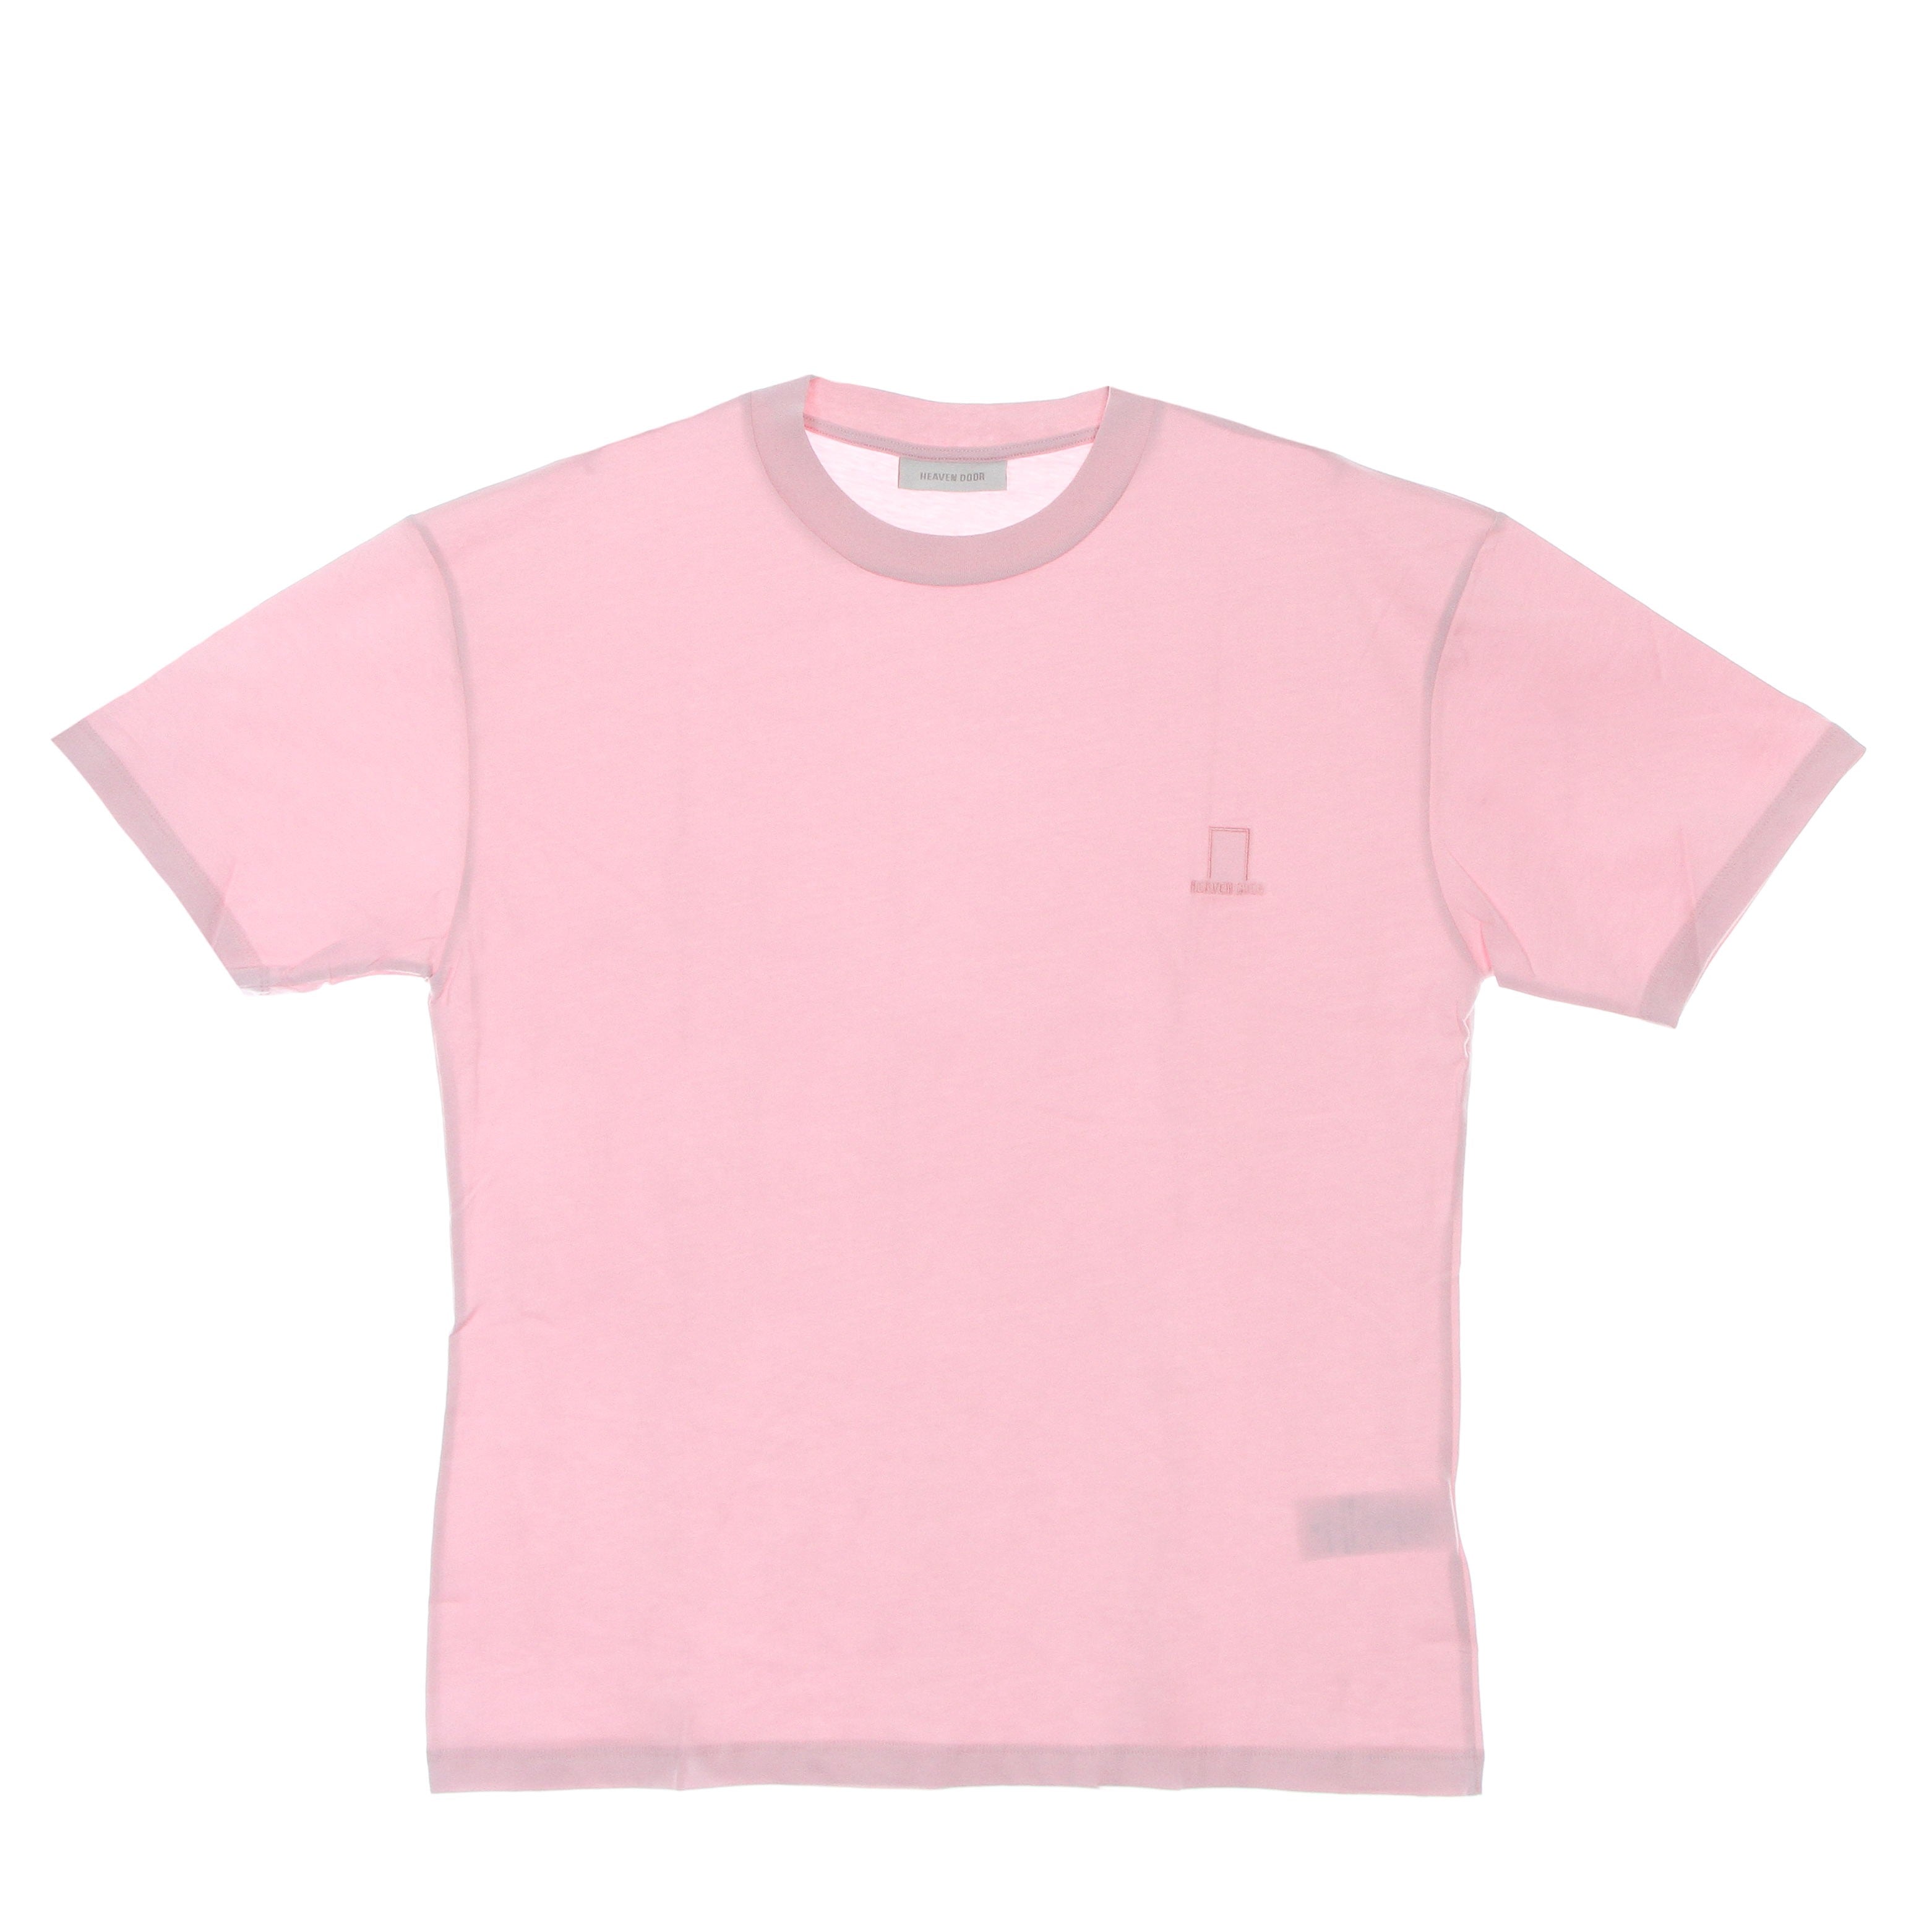 Men's T-Shirt Embroidered Logo Tee Pink